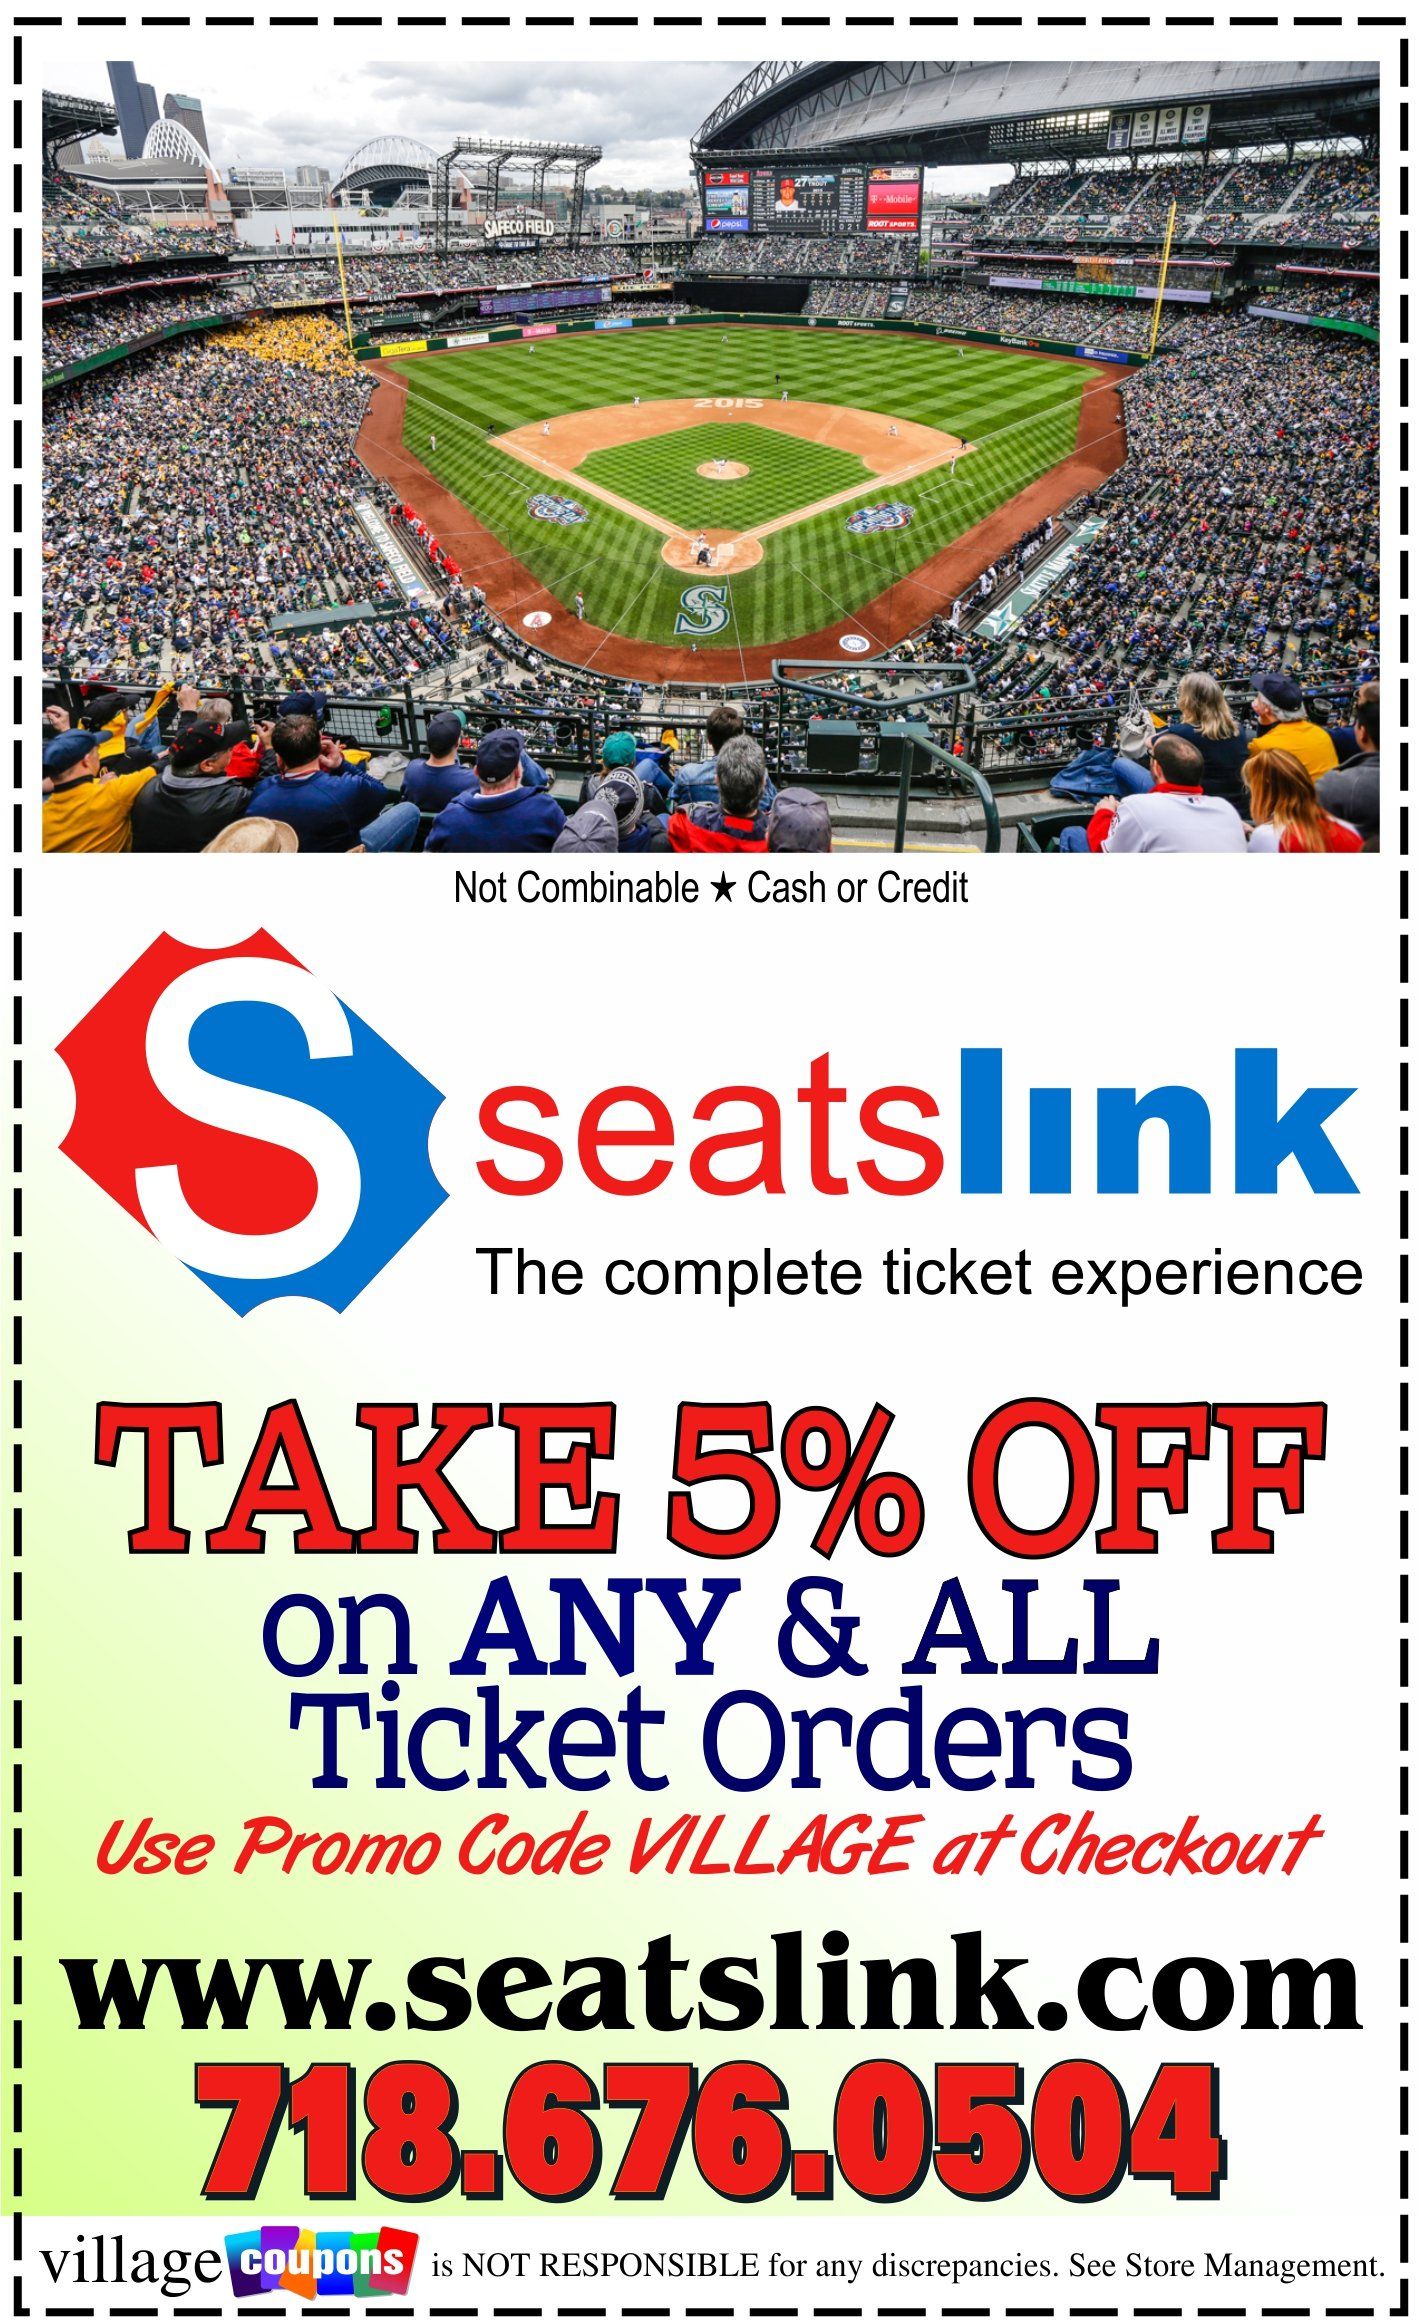 An advertisement for seatslink that says take 5% off on any & all ticket orders